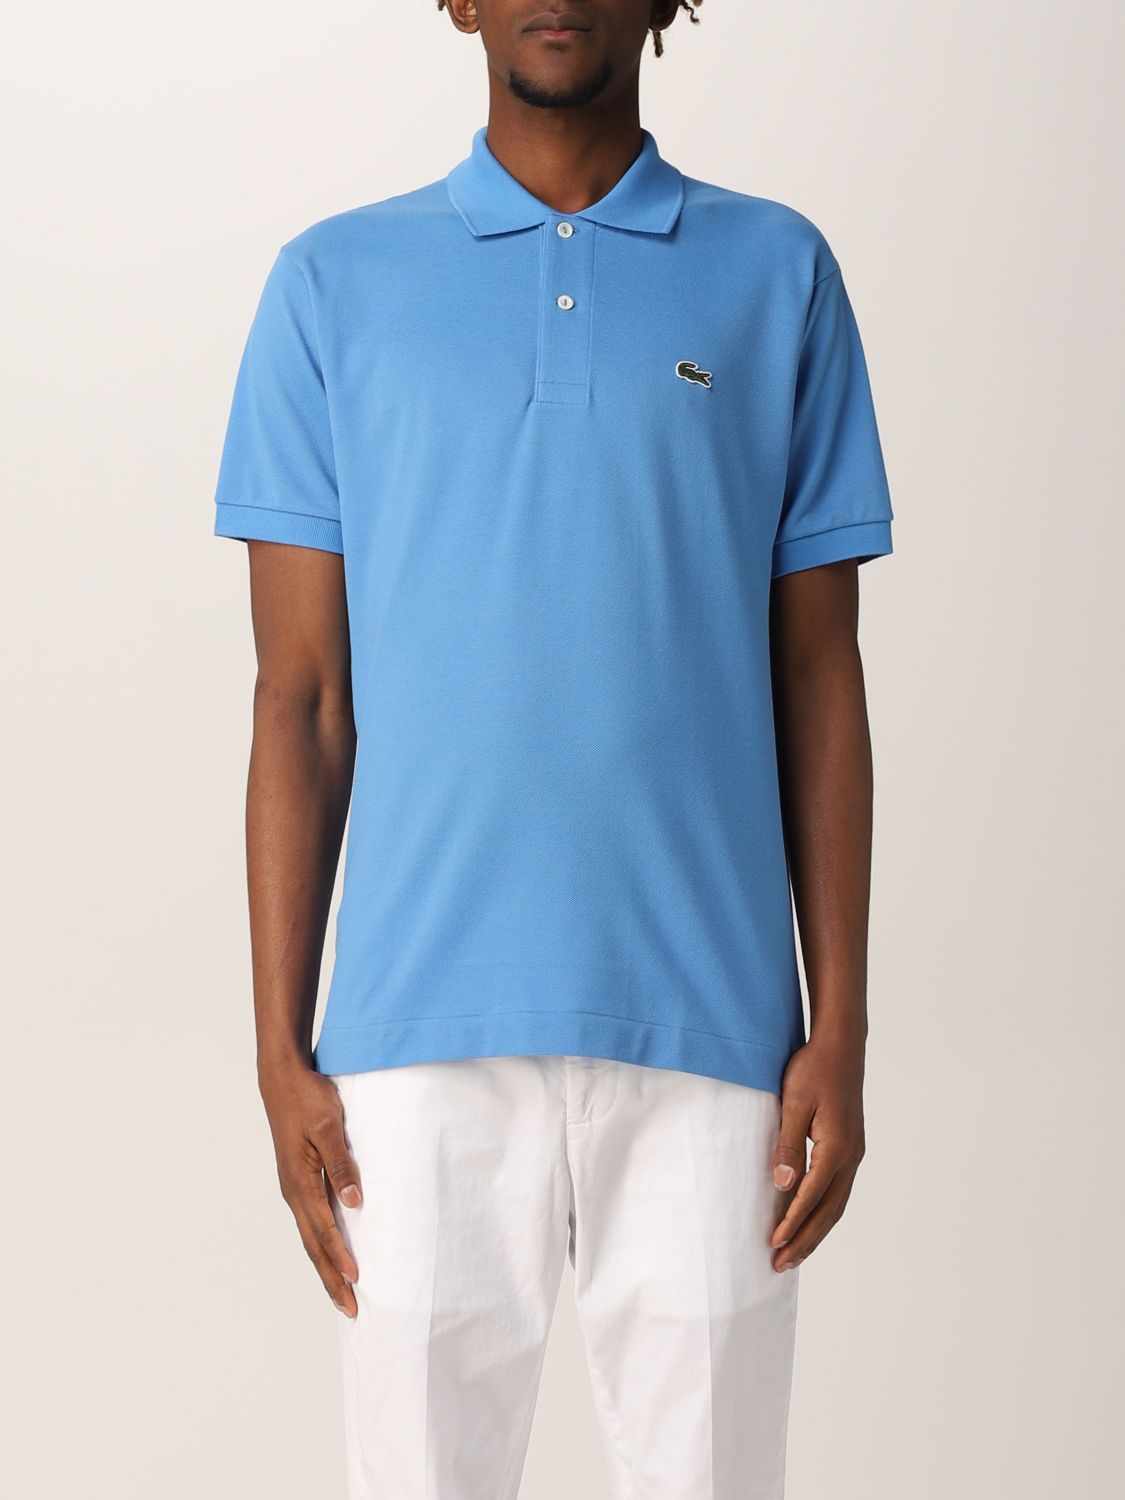 LACOSTE: polo shirt with logo - | Lacoste polo shirt L1212 online on GIGLIO.COM